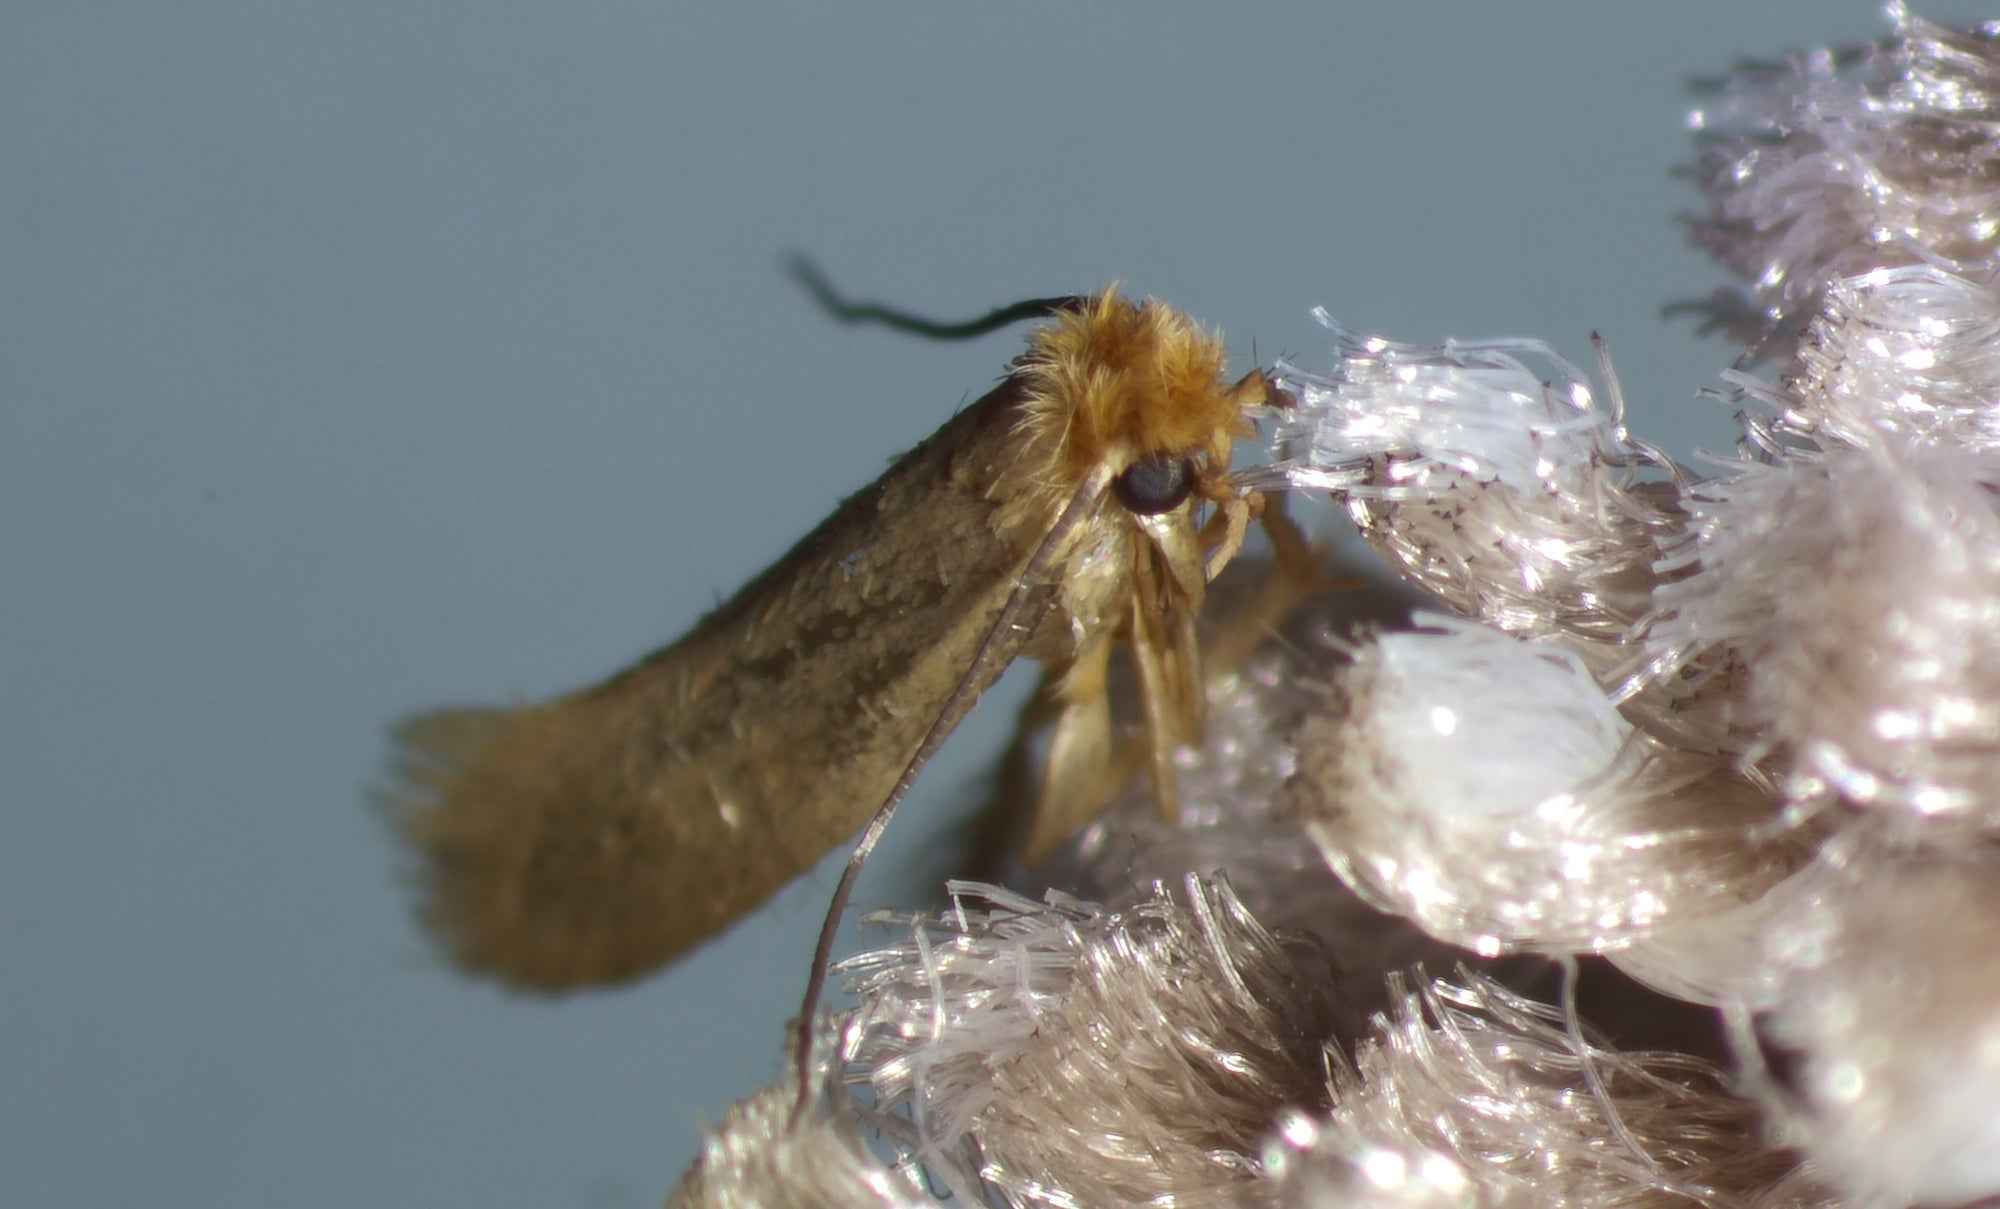 Clothes/Food Moth Control with Trichogramma